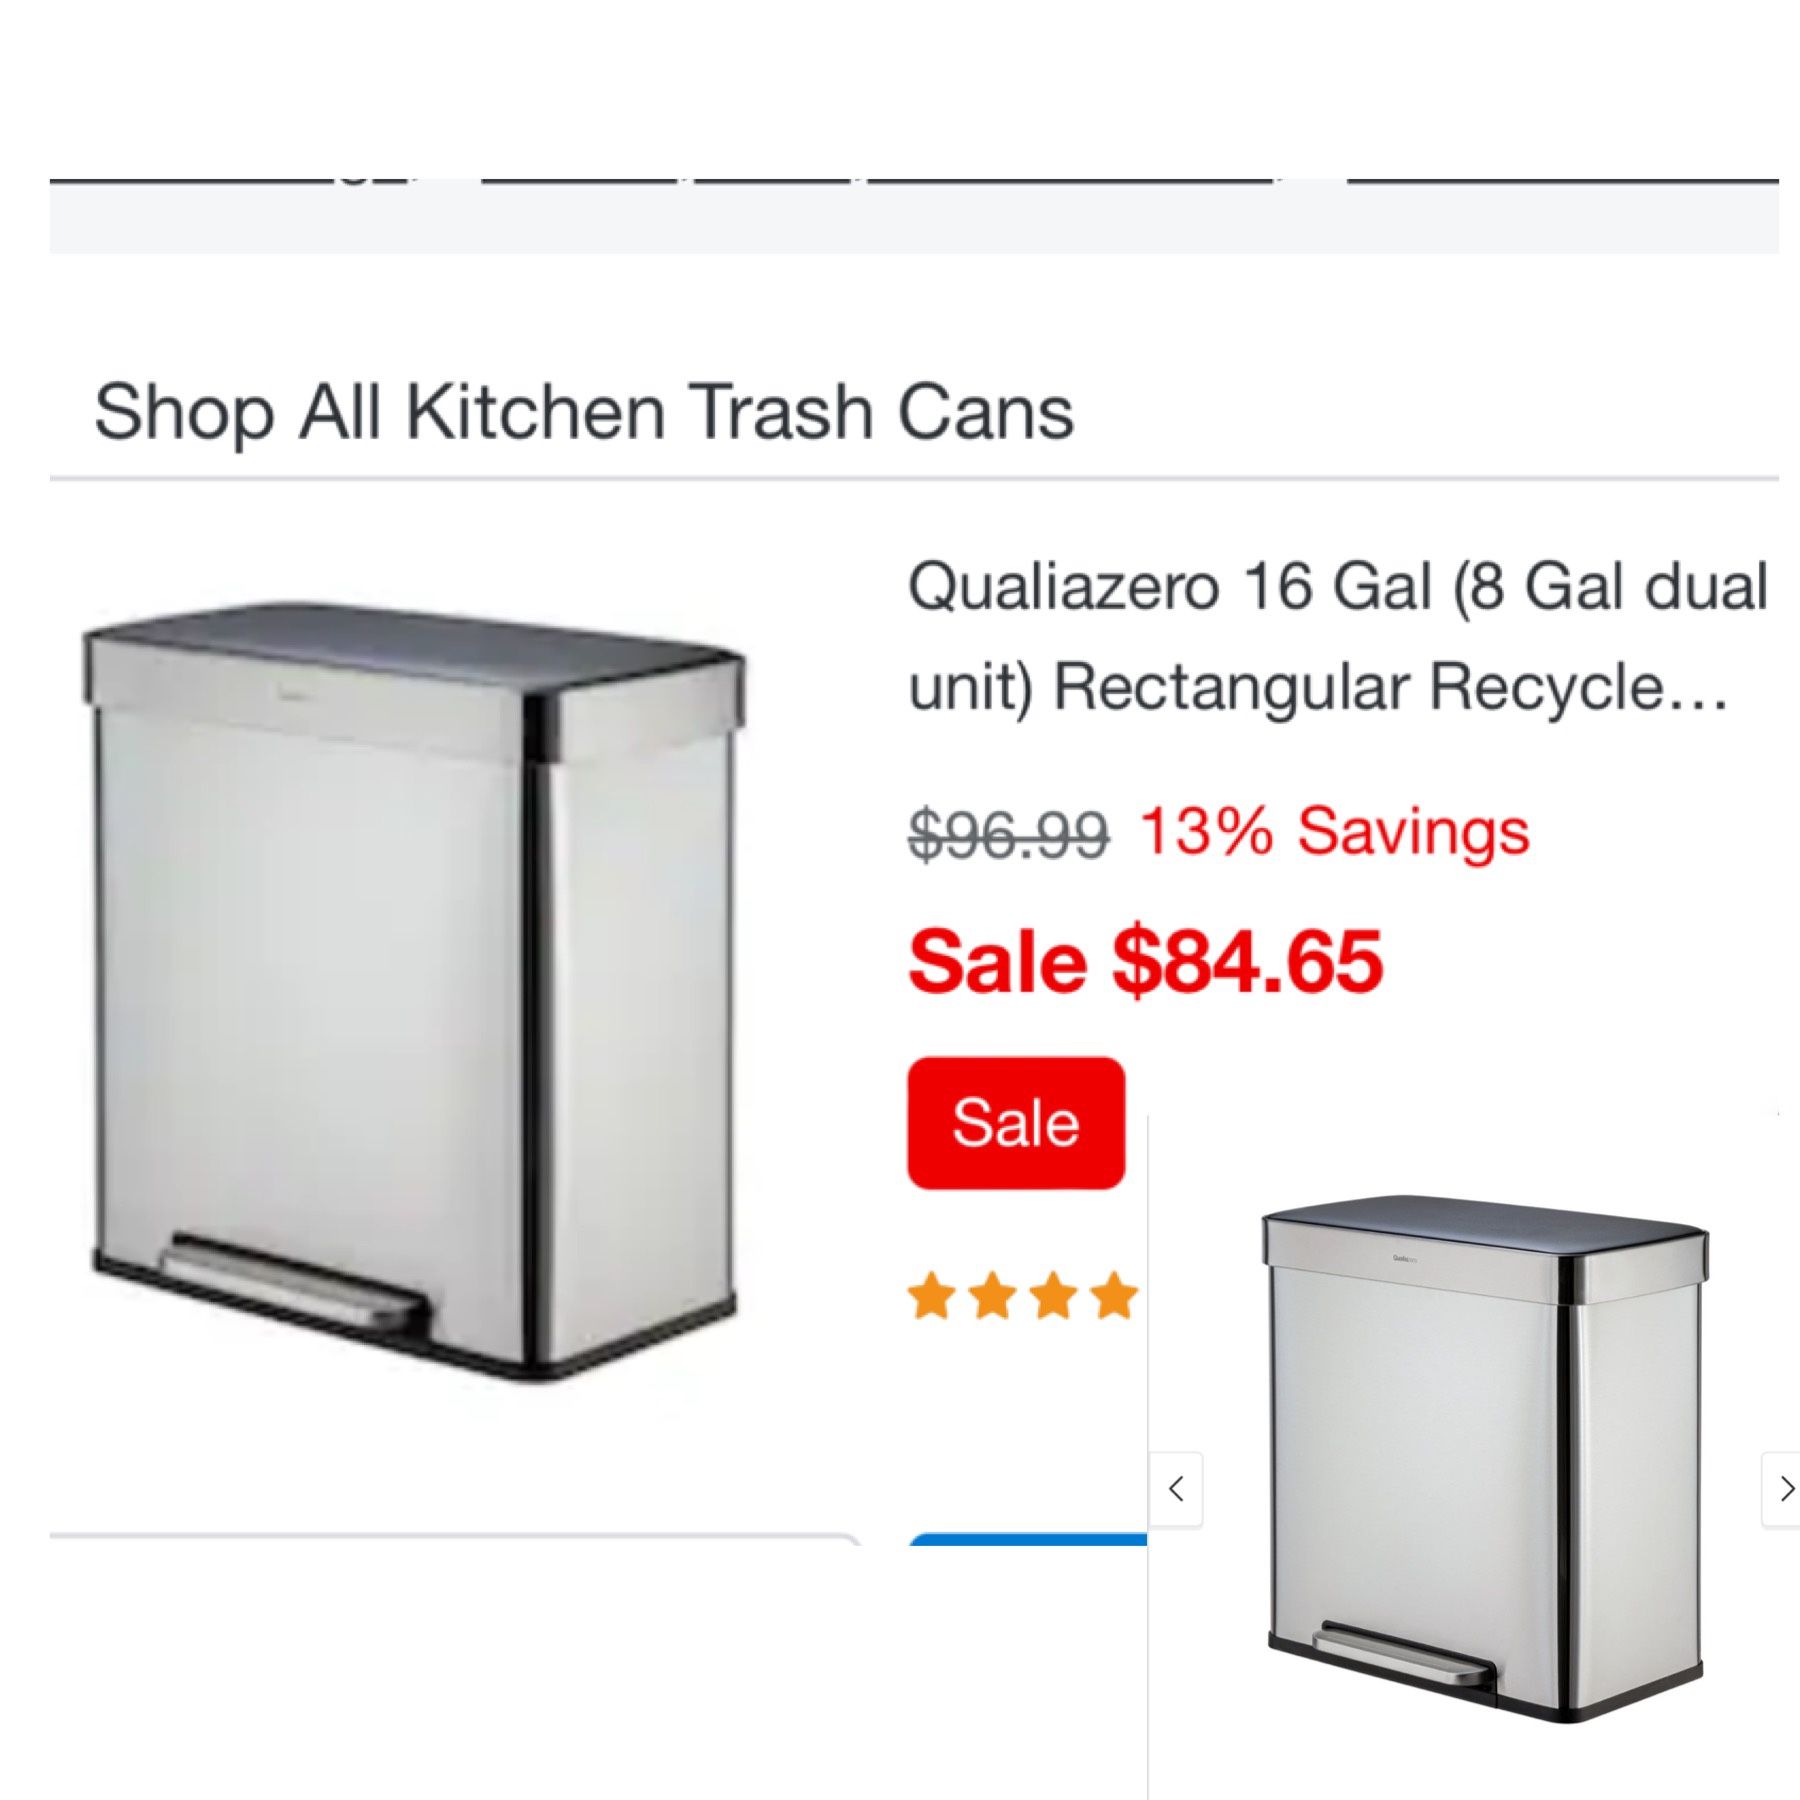 Qualiazero 16 Gallon Trash Can 8 Gallon Dual Compartment Step On Kitchen Trash Can Stainless Steel